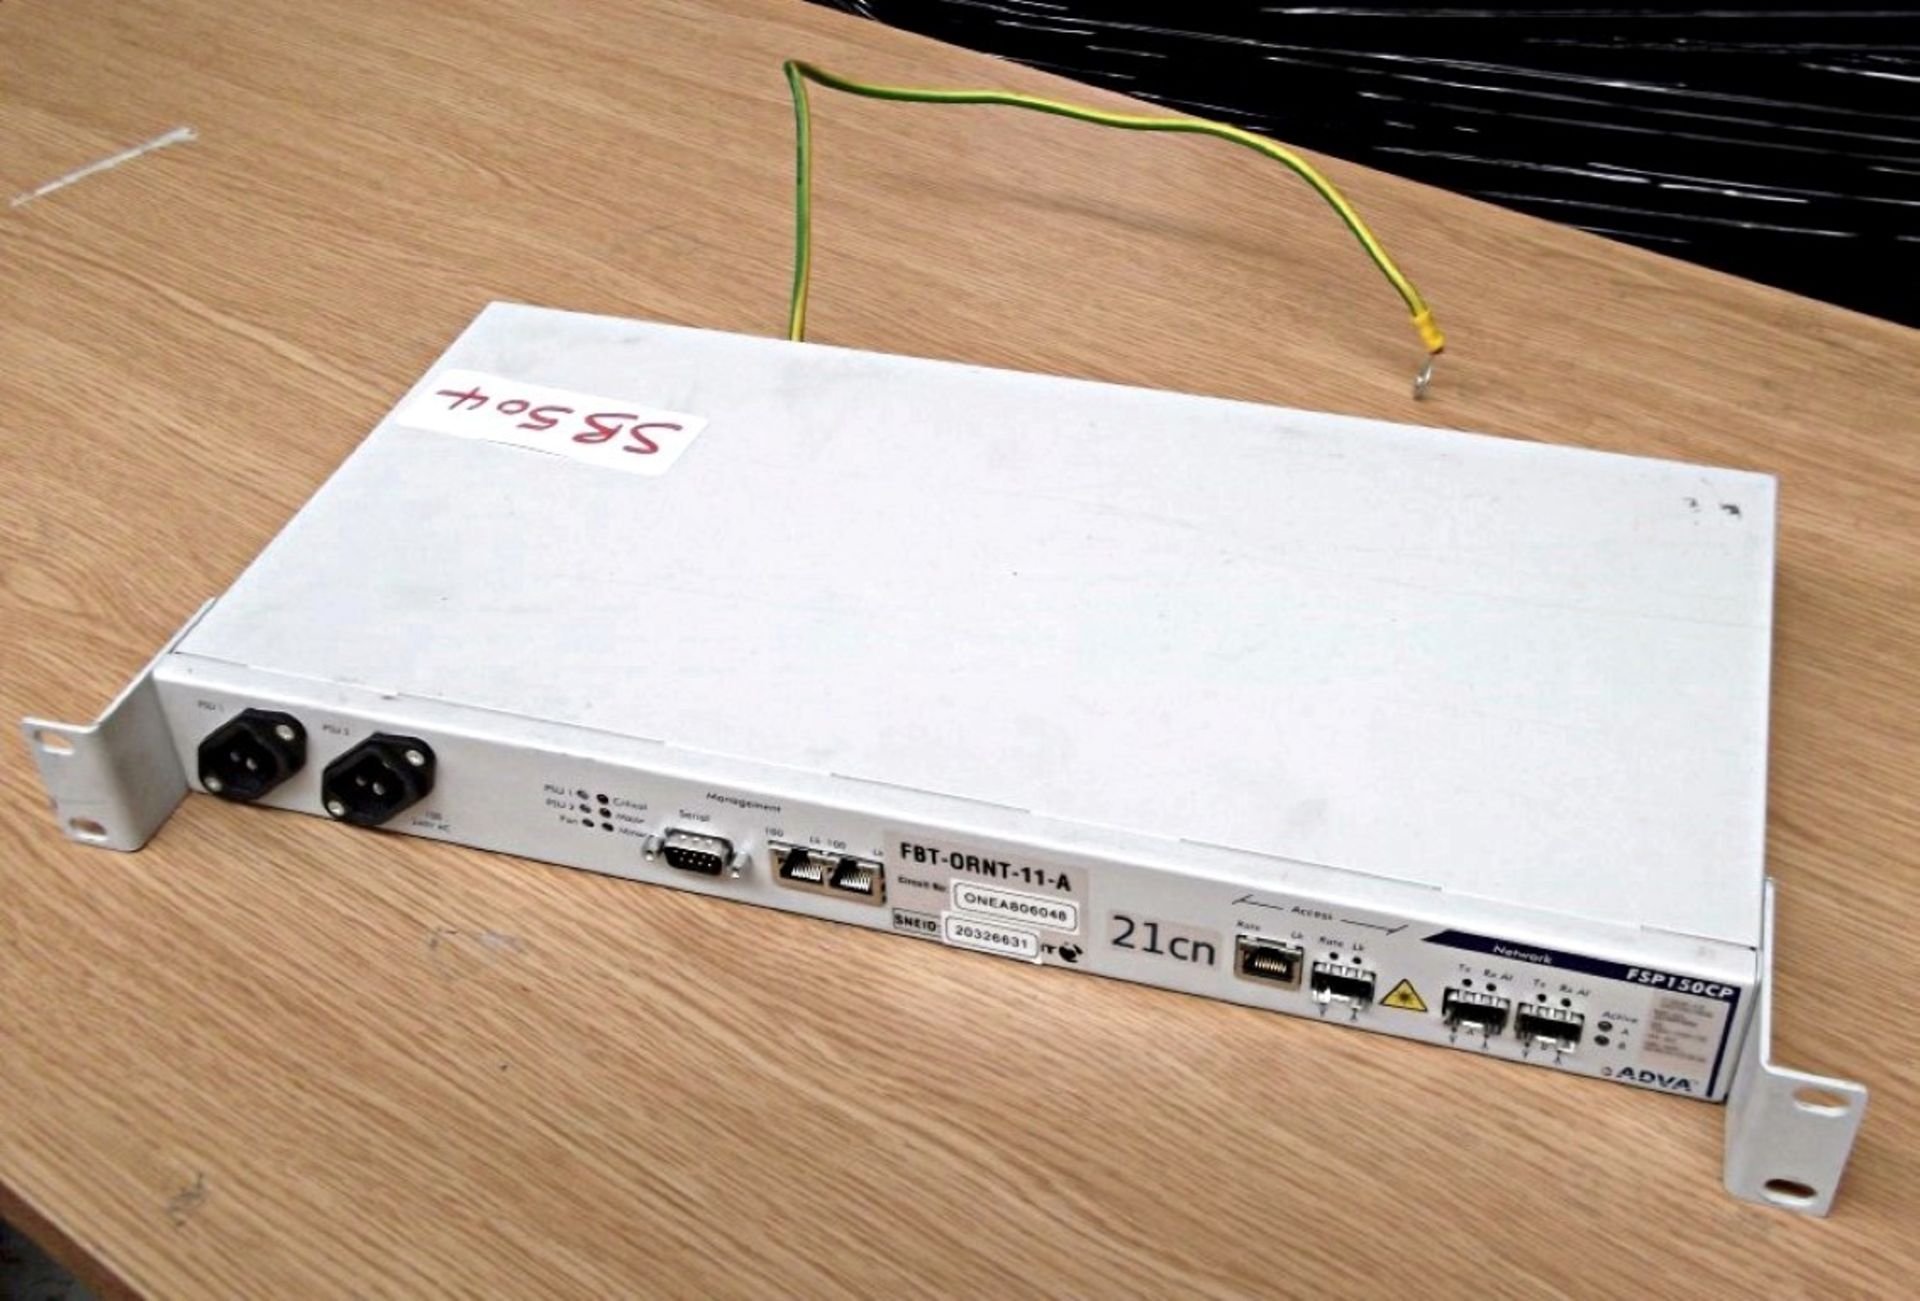 1 x Adva FSP150CP Gigabit Ethernet Optical Fibre Access Device - Ref SB504 - Recently Removed From A